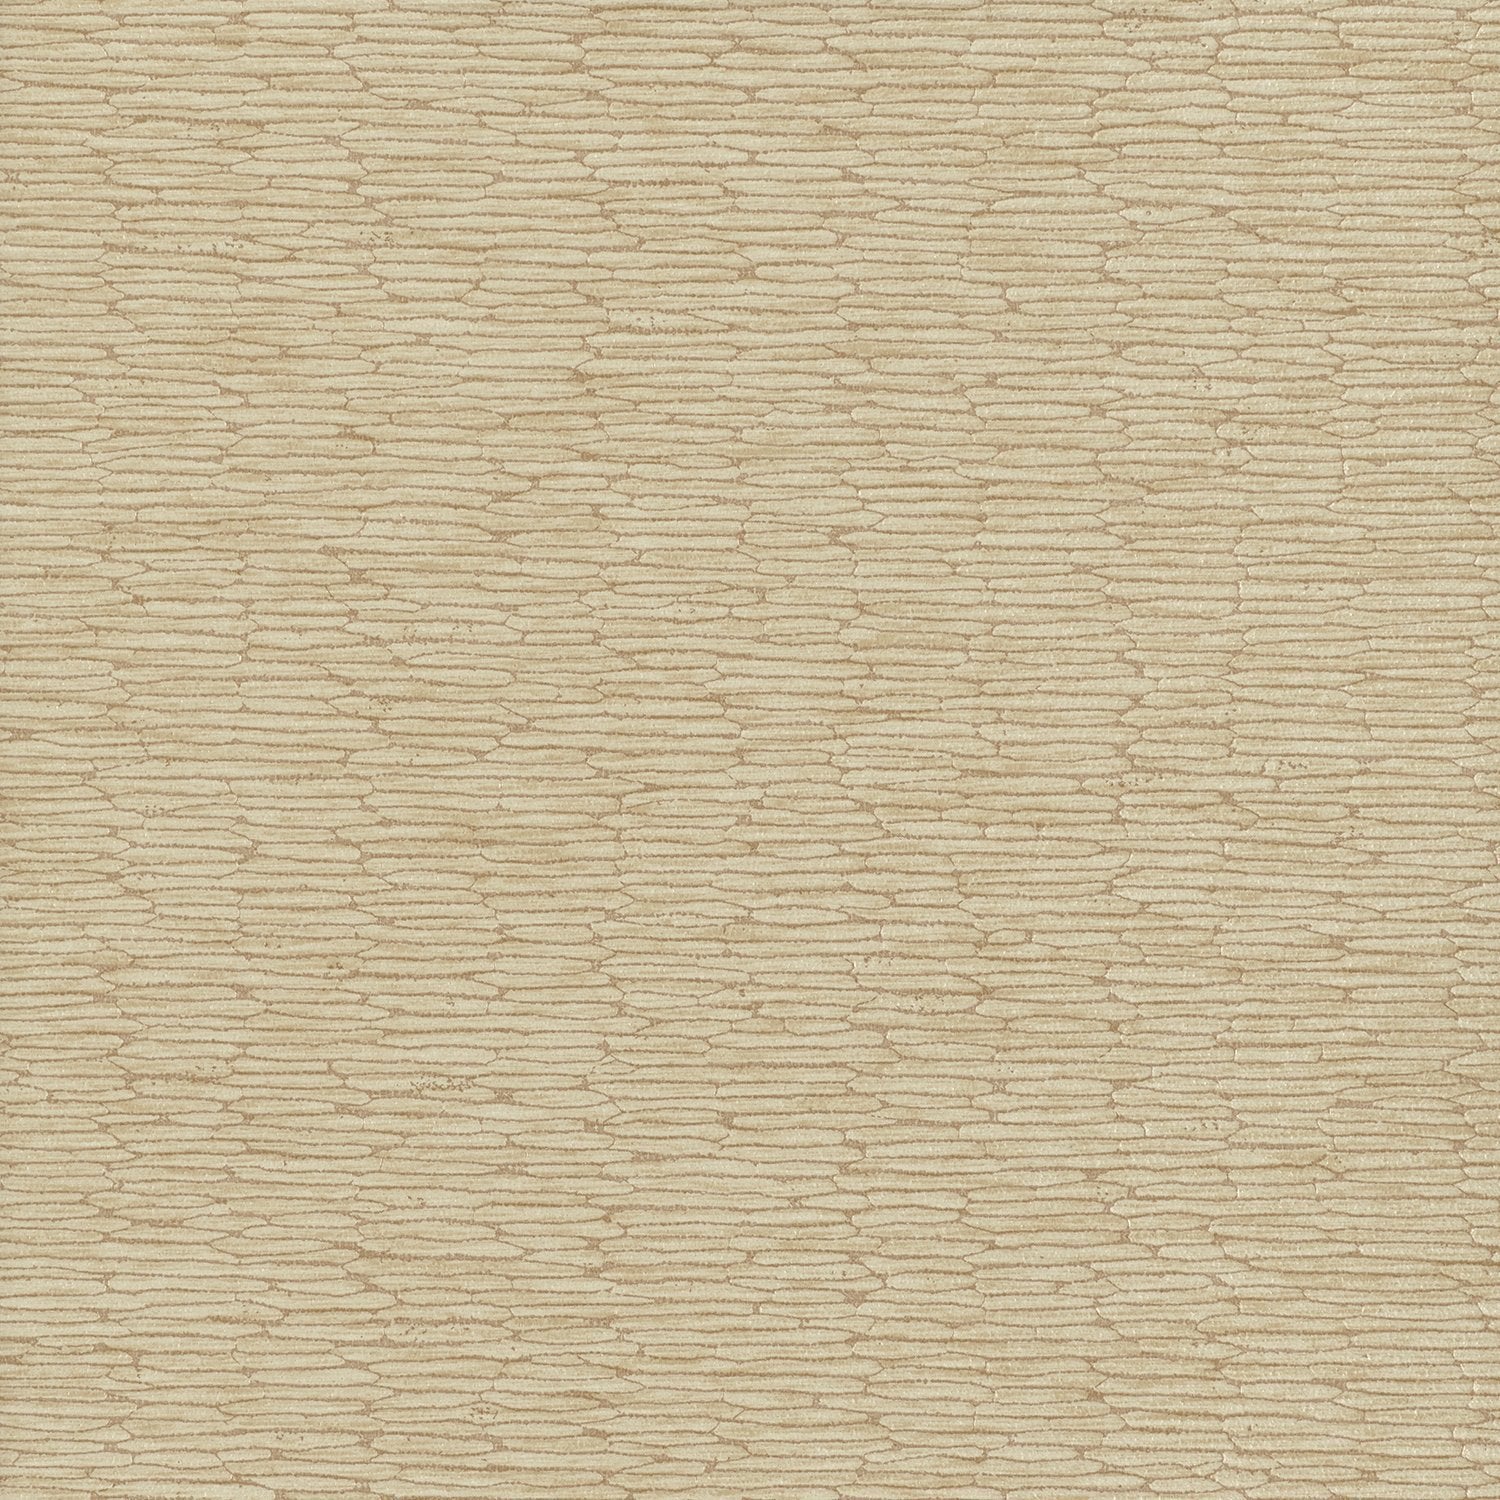 Chipper - Y46850 - Wallcovering - Vycon - Kube Contract